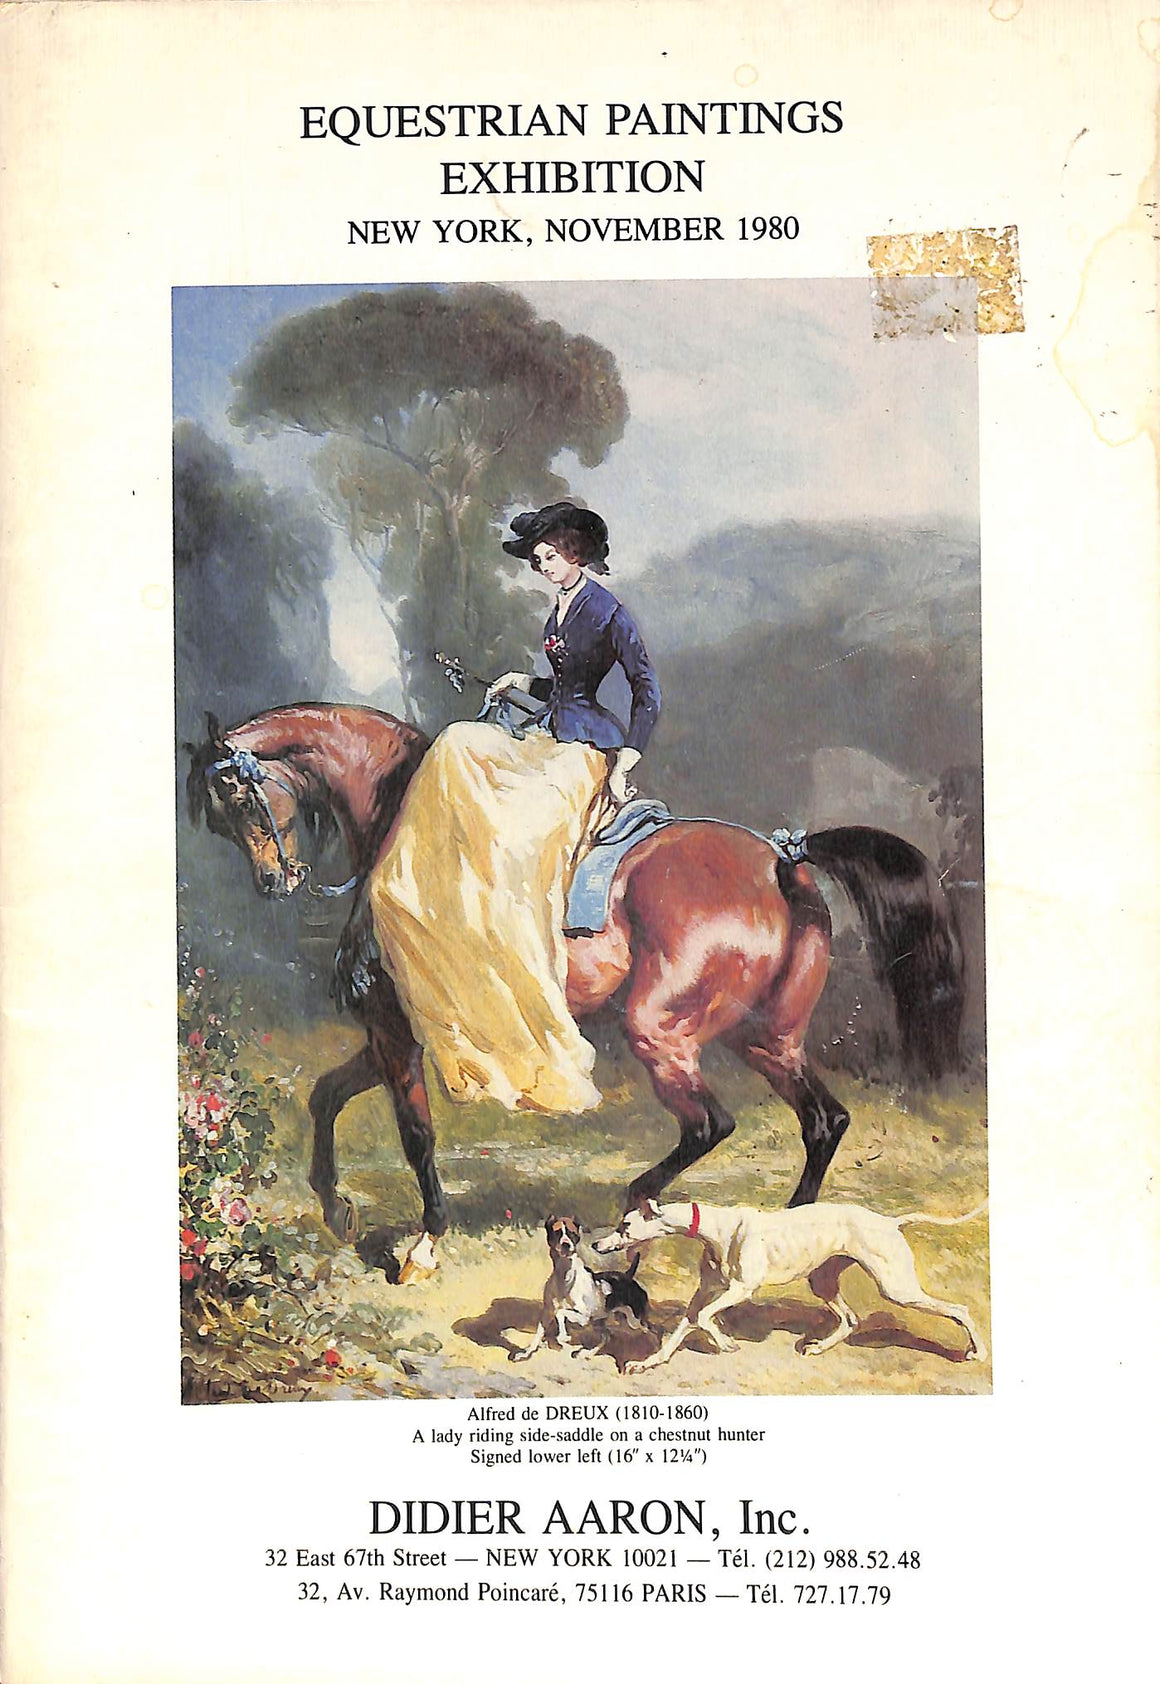 "Equestrian Paintings Exhibition - November 1980"